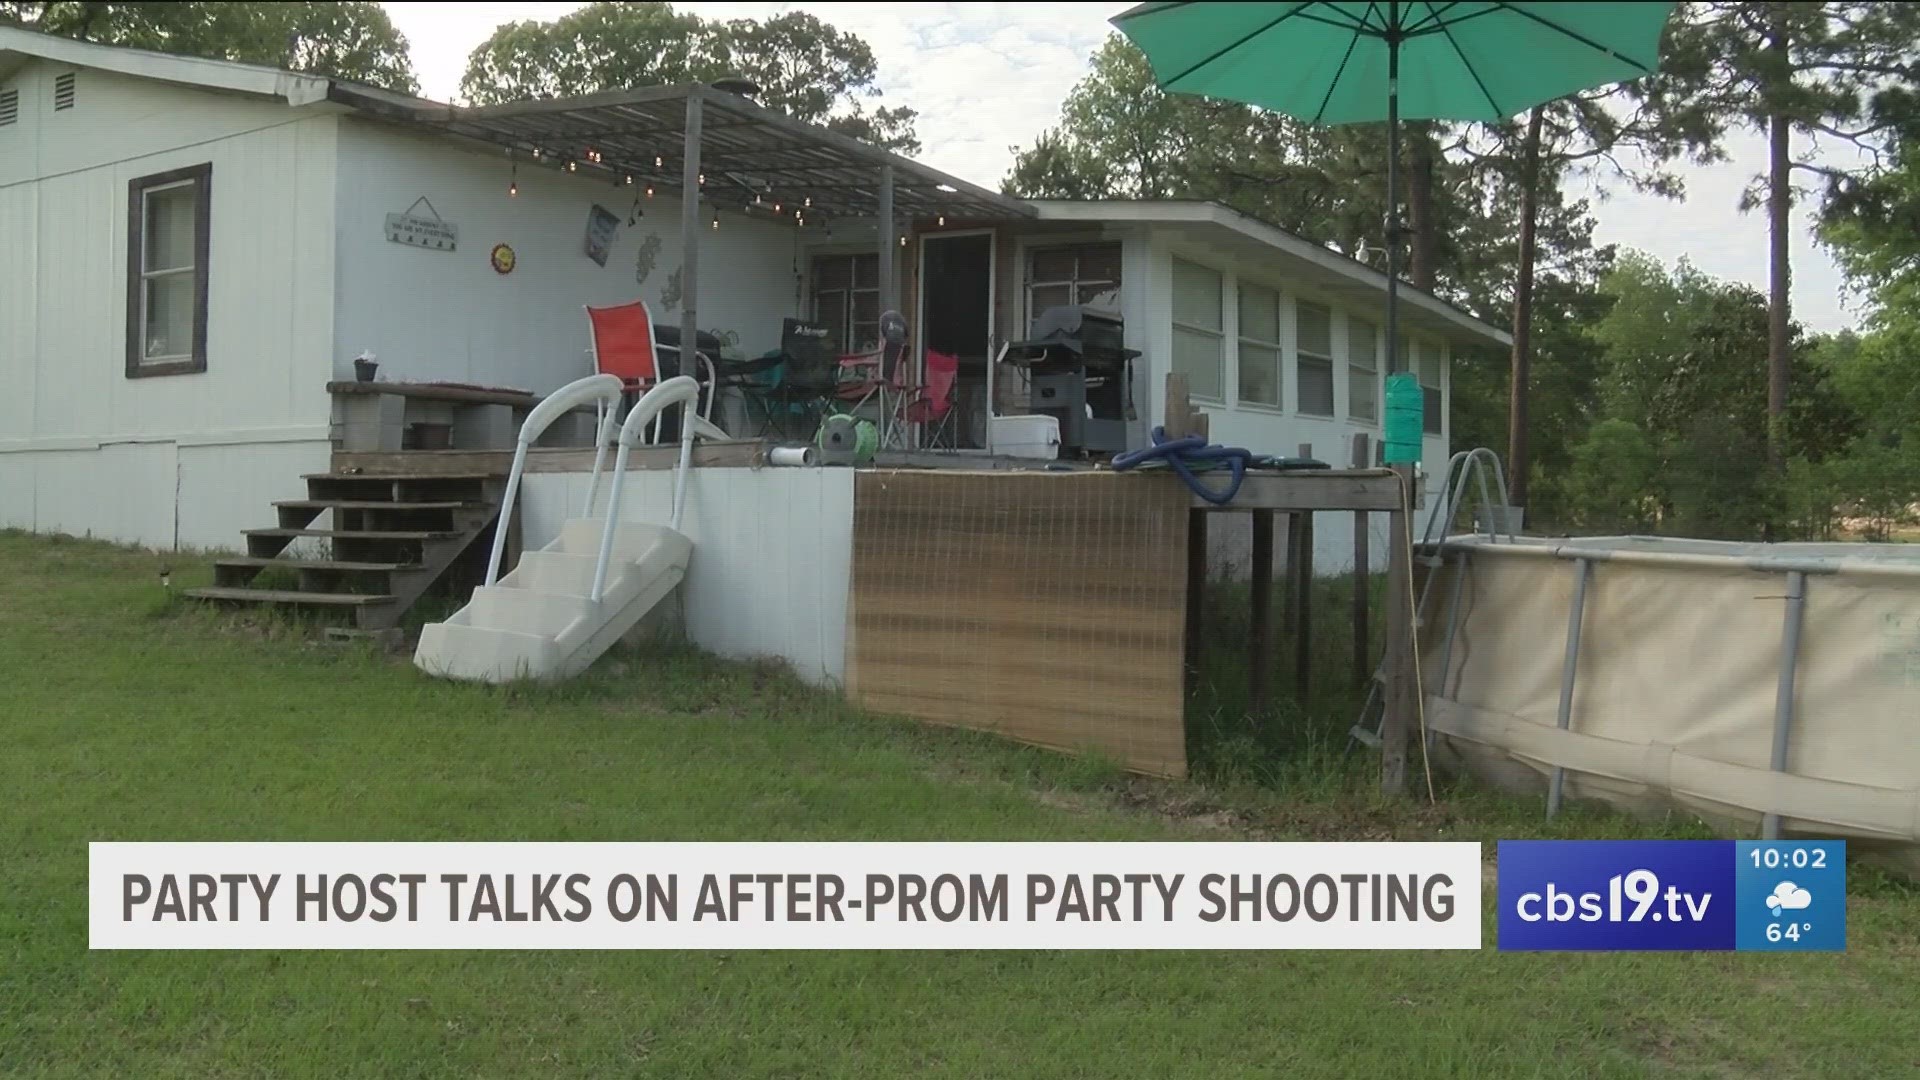 Party host shares experience of 'after-prom' party shooting